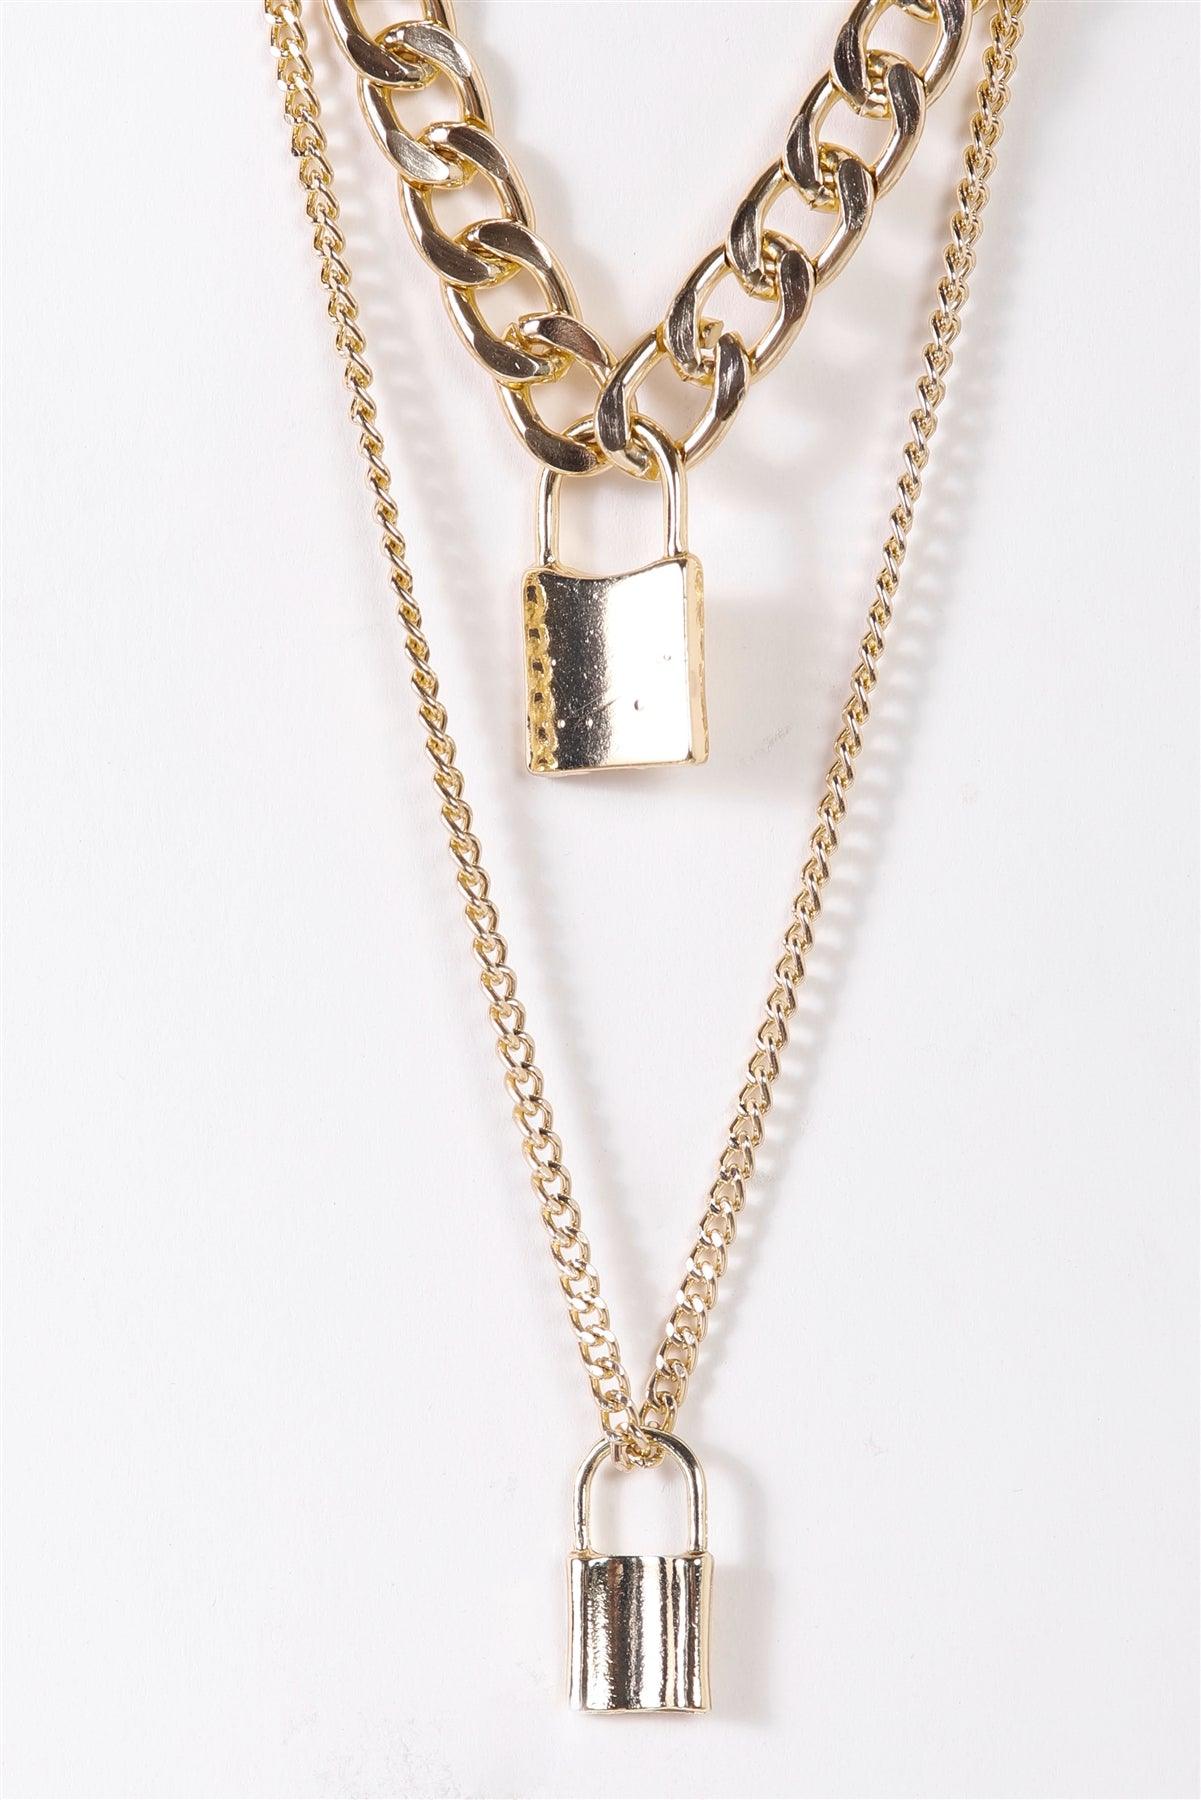 Gold Chunky & Link Chains With Padlocks Set Necklace /3 Pieces